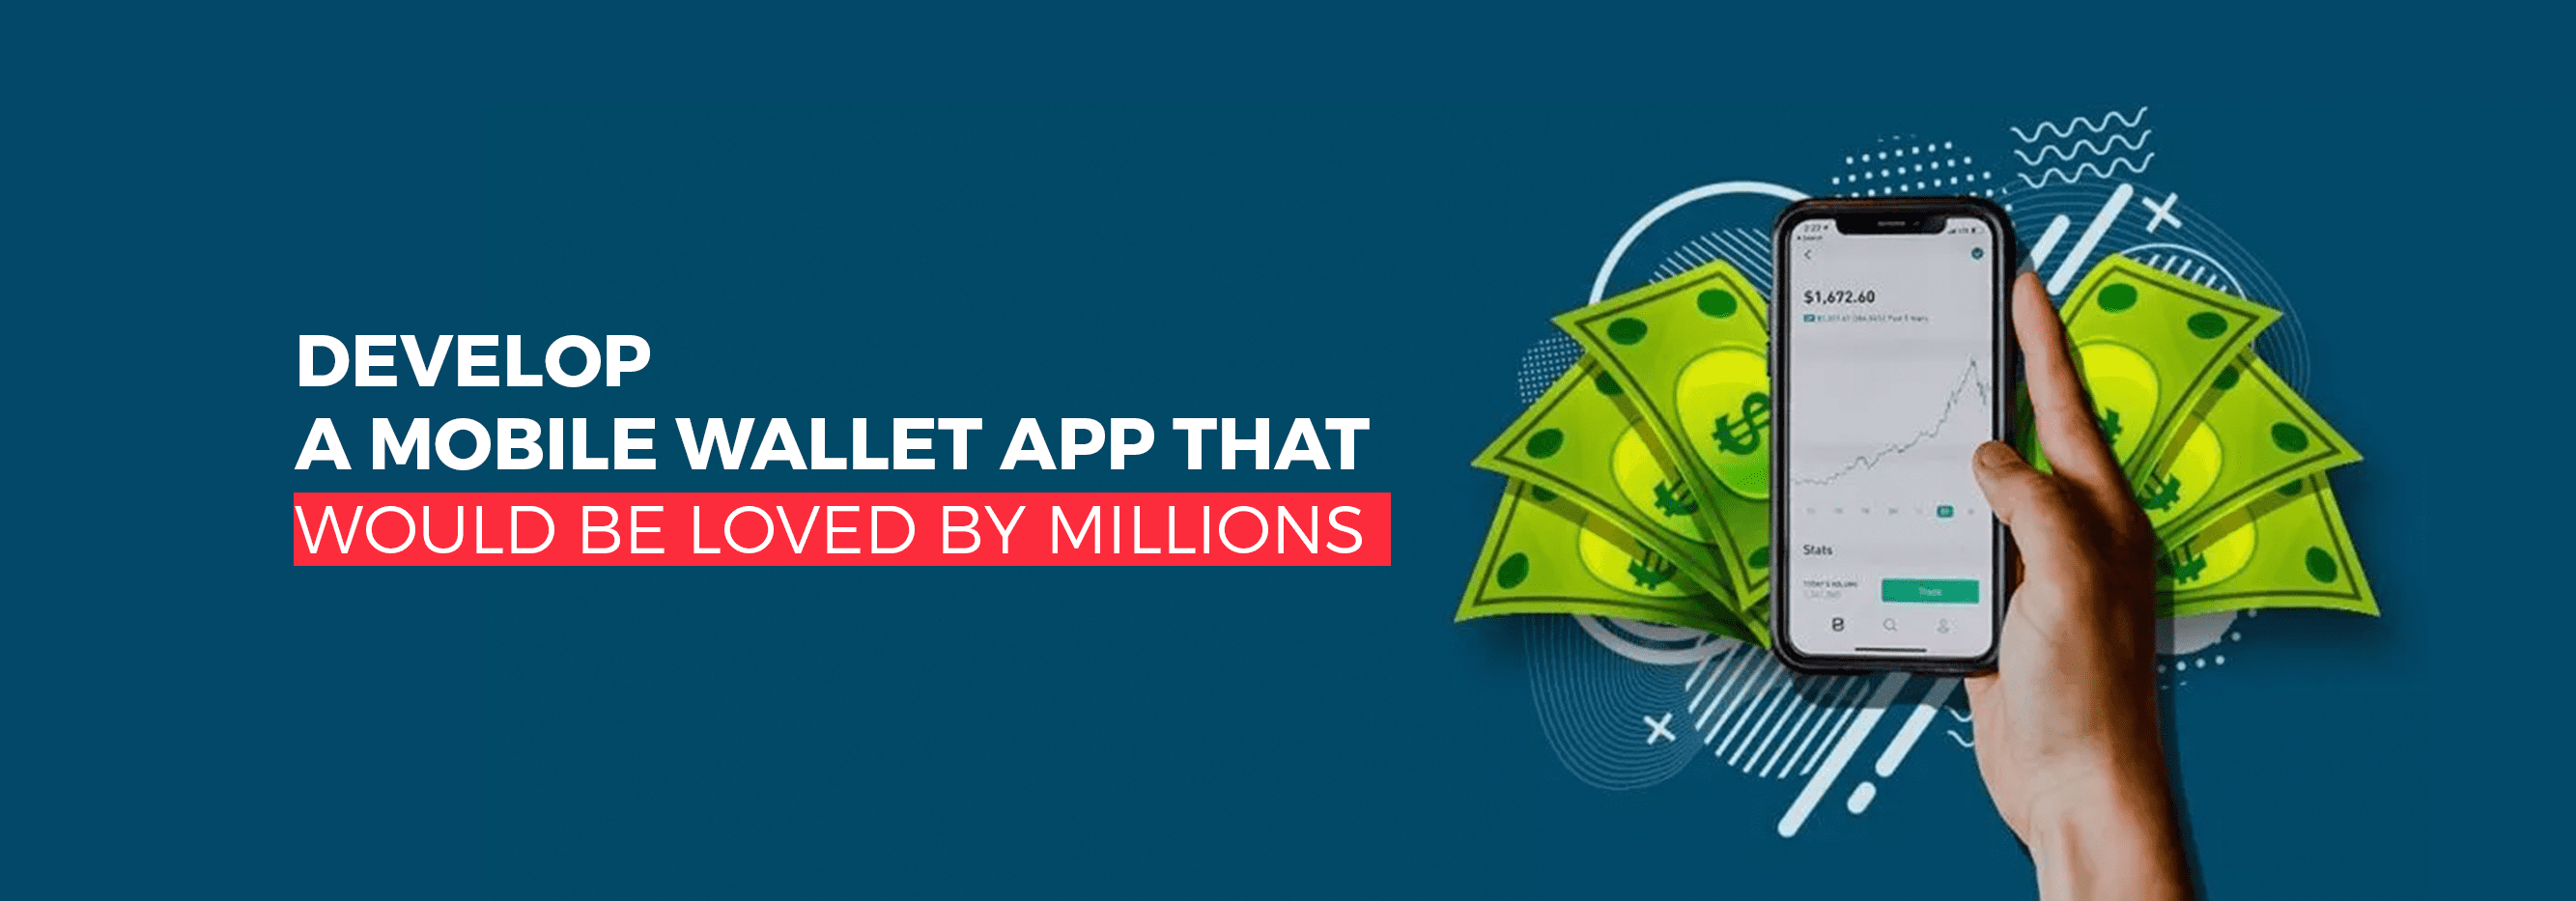 Develop a mobile wallet app that would be loved by millions_banner